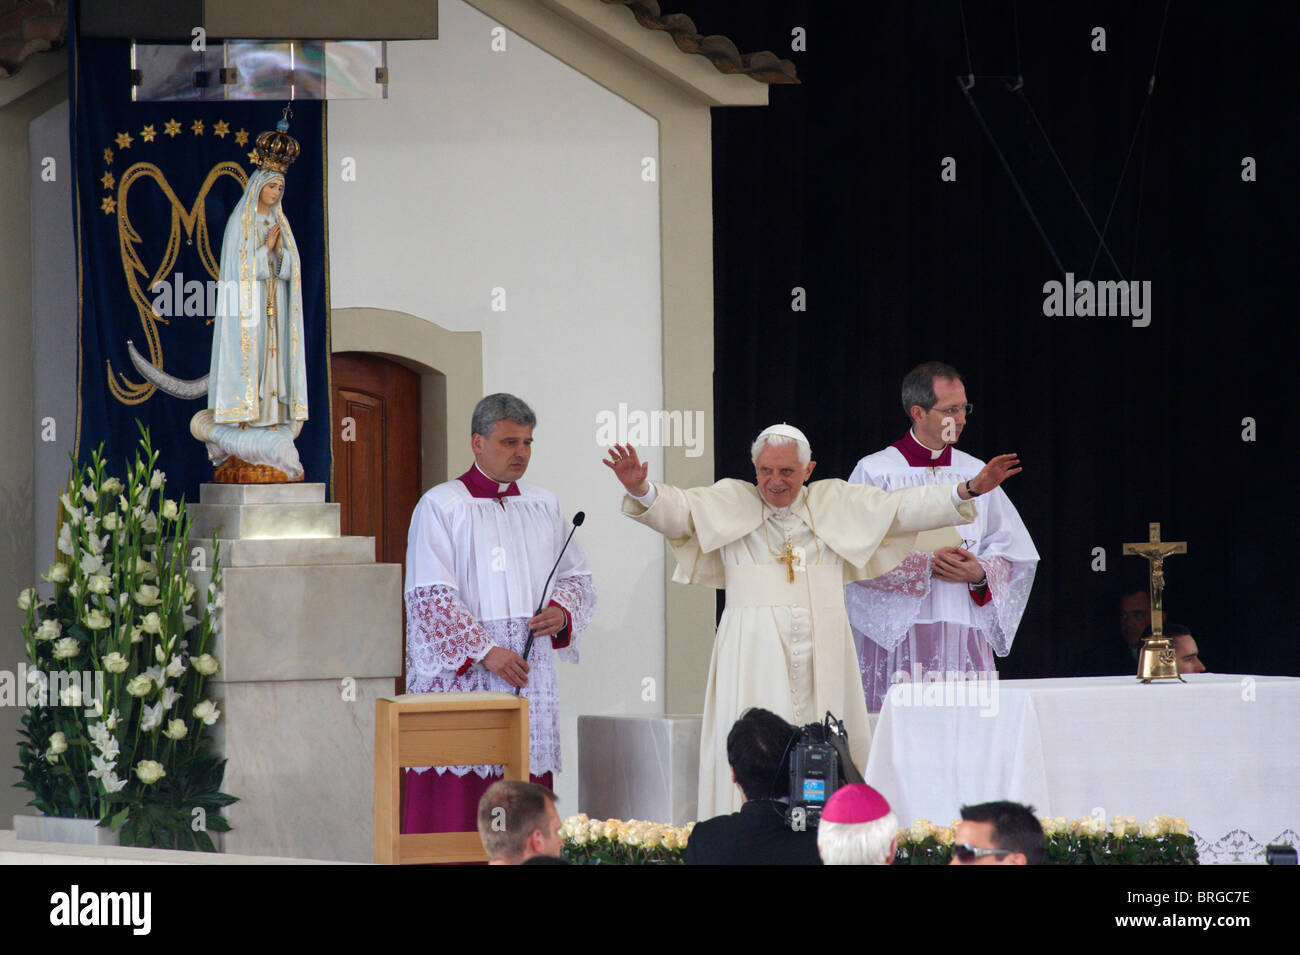 Pope Benedict XVI waves at pilgrims at the Our Lady of Fatima shrine during his visit to Portugal in May 2010 Stock Photo